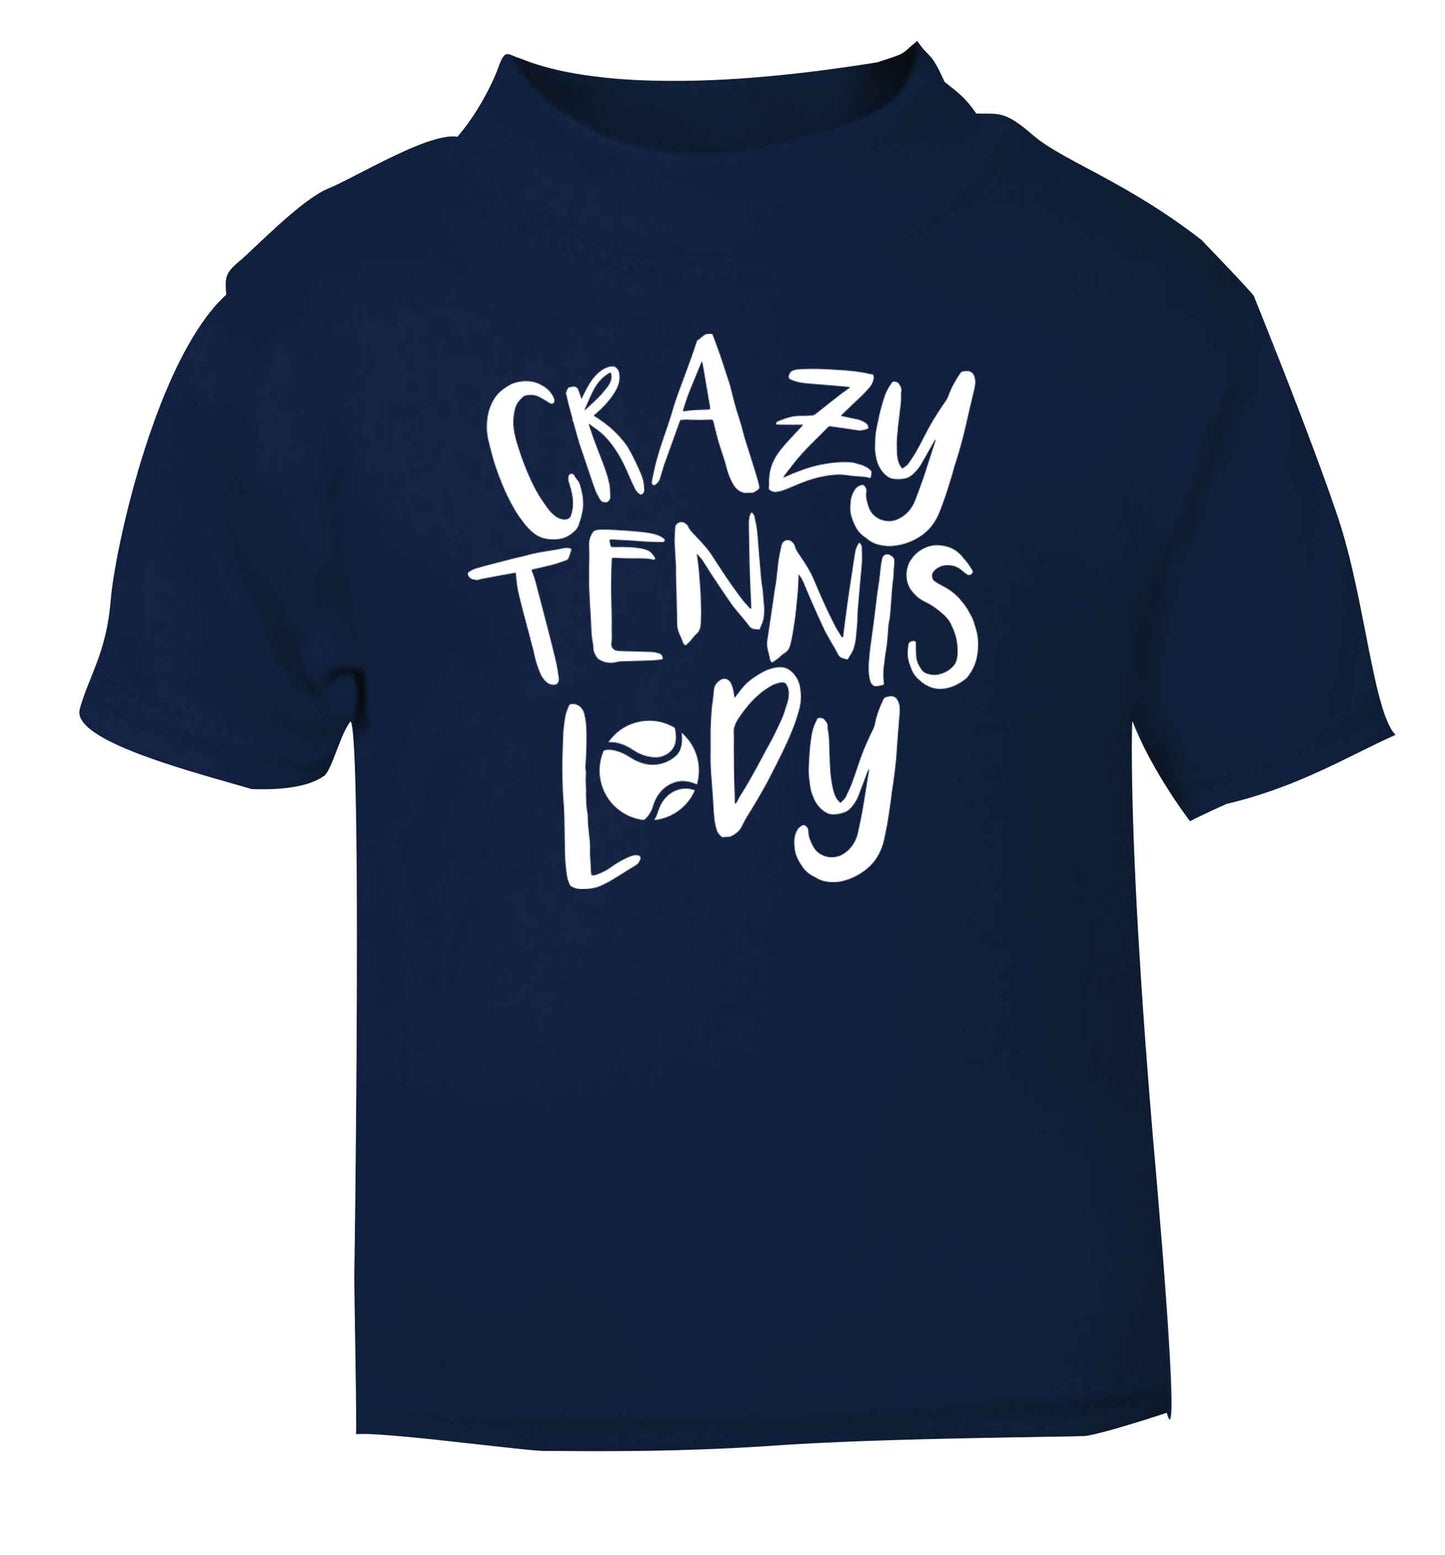 Crazy tennis lady navy Baby Toddler Tshirt 2 Years